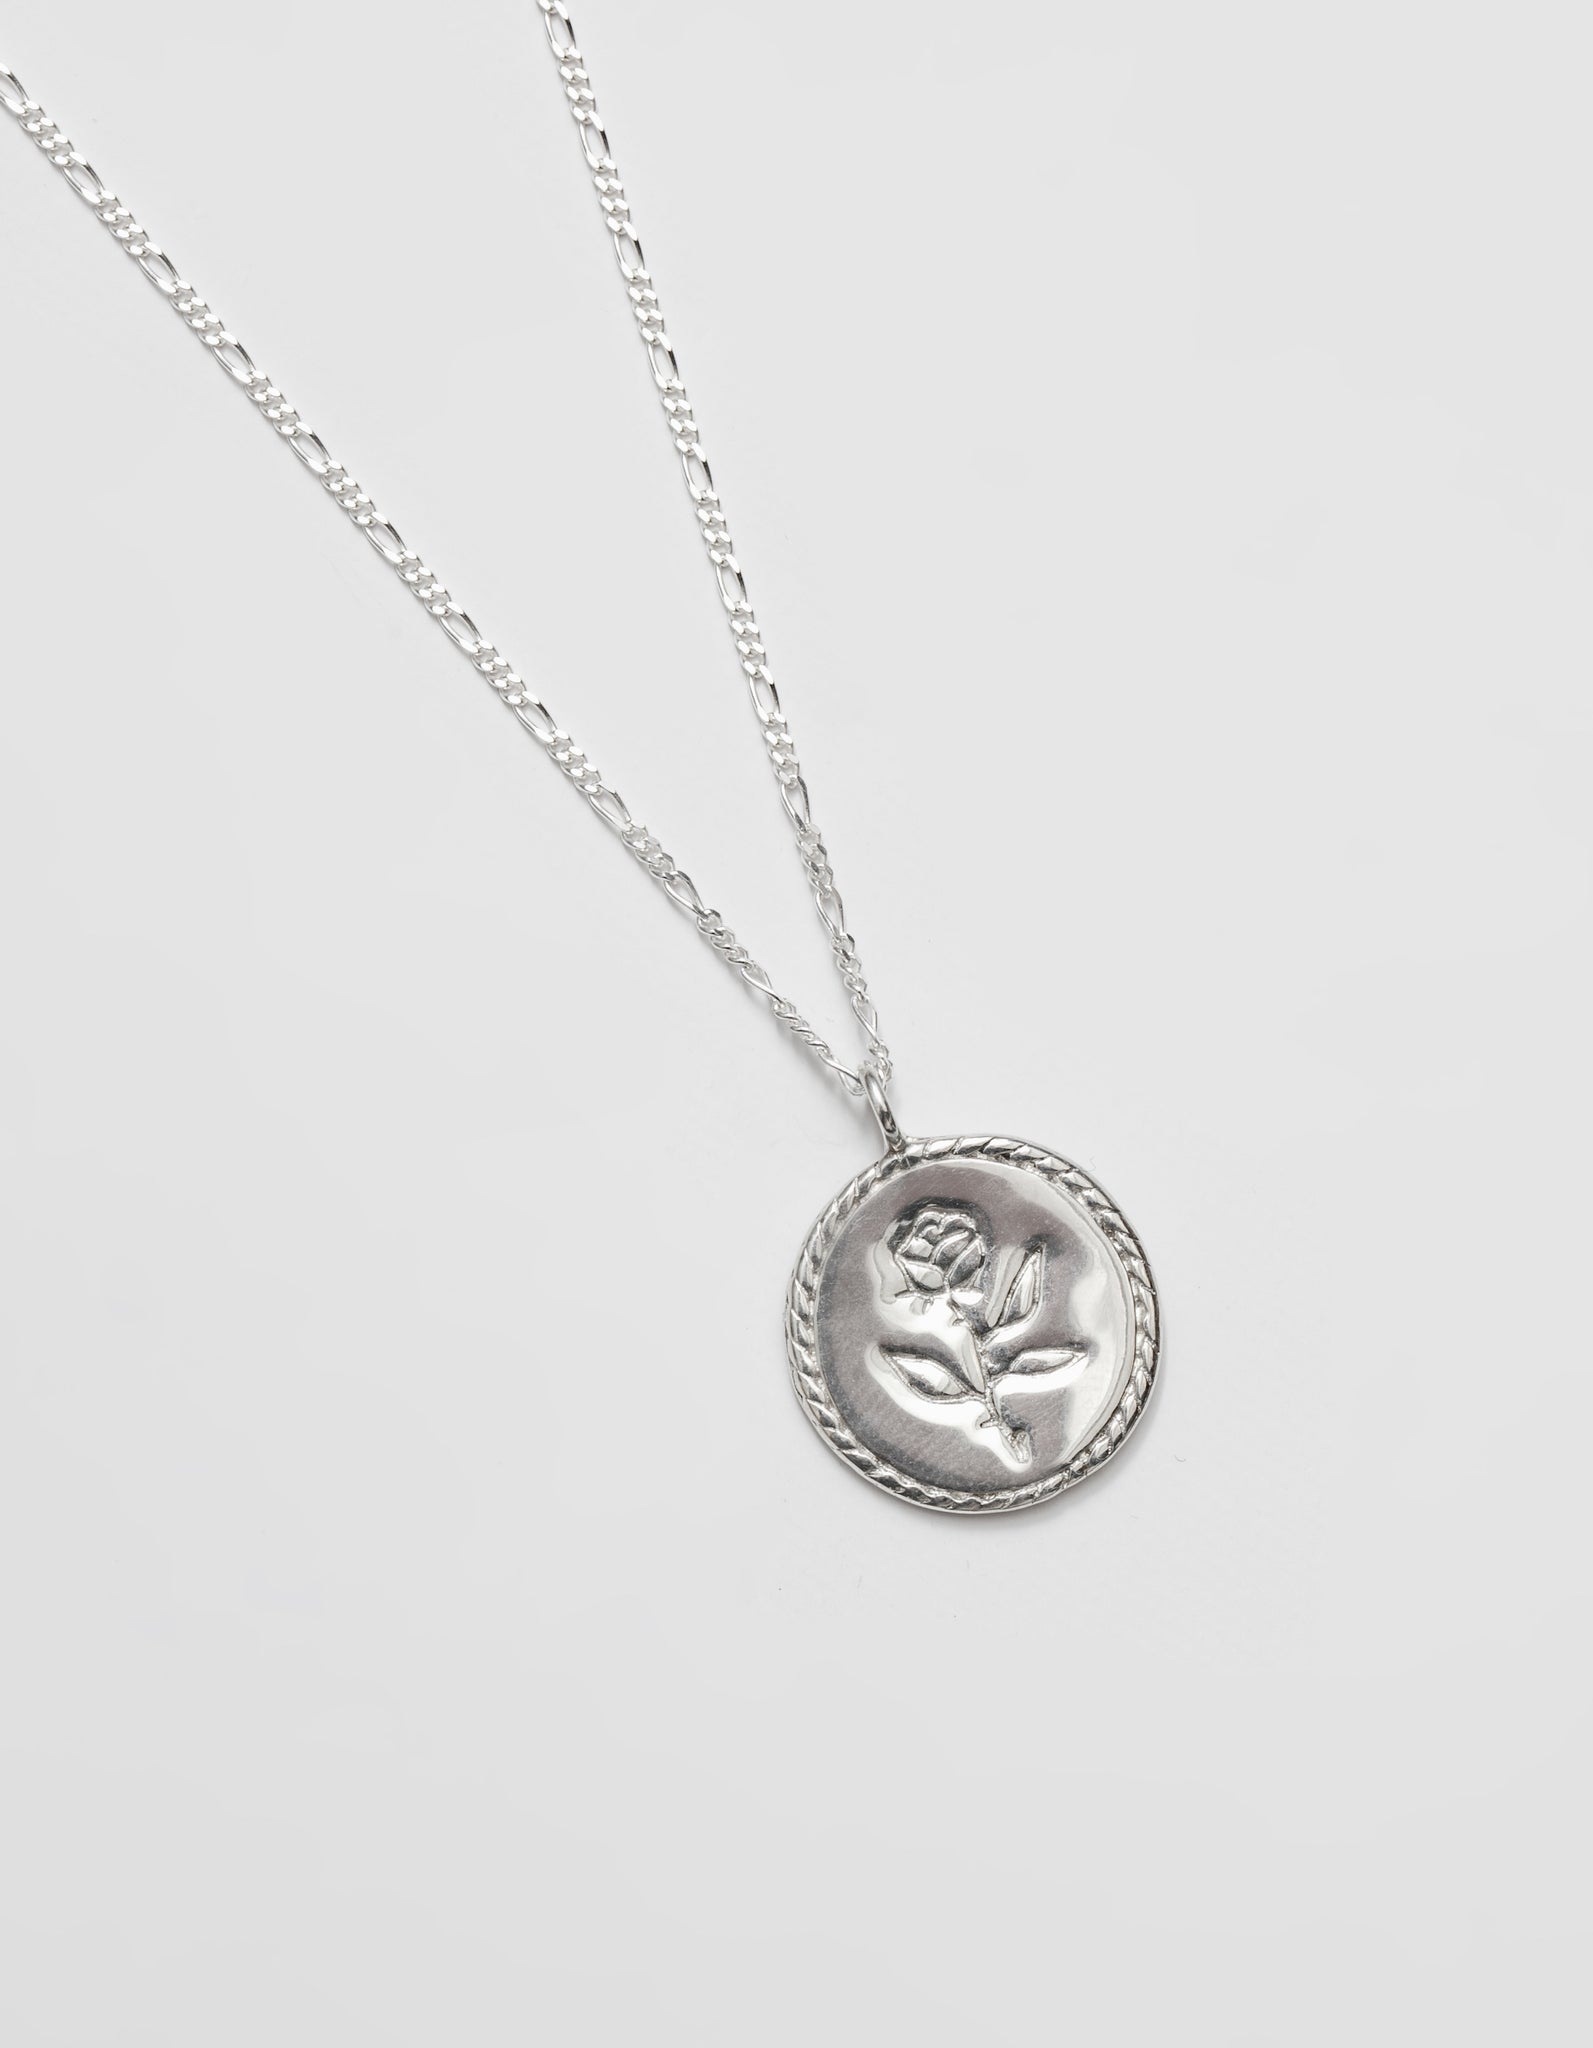 Wolf Circus Rose Coin Pendant Necklace in Sterling Silver | Recycled Metals | Circular Engraved Pendant & Singapore Chain-Necklaces-wolfcircus.com